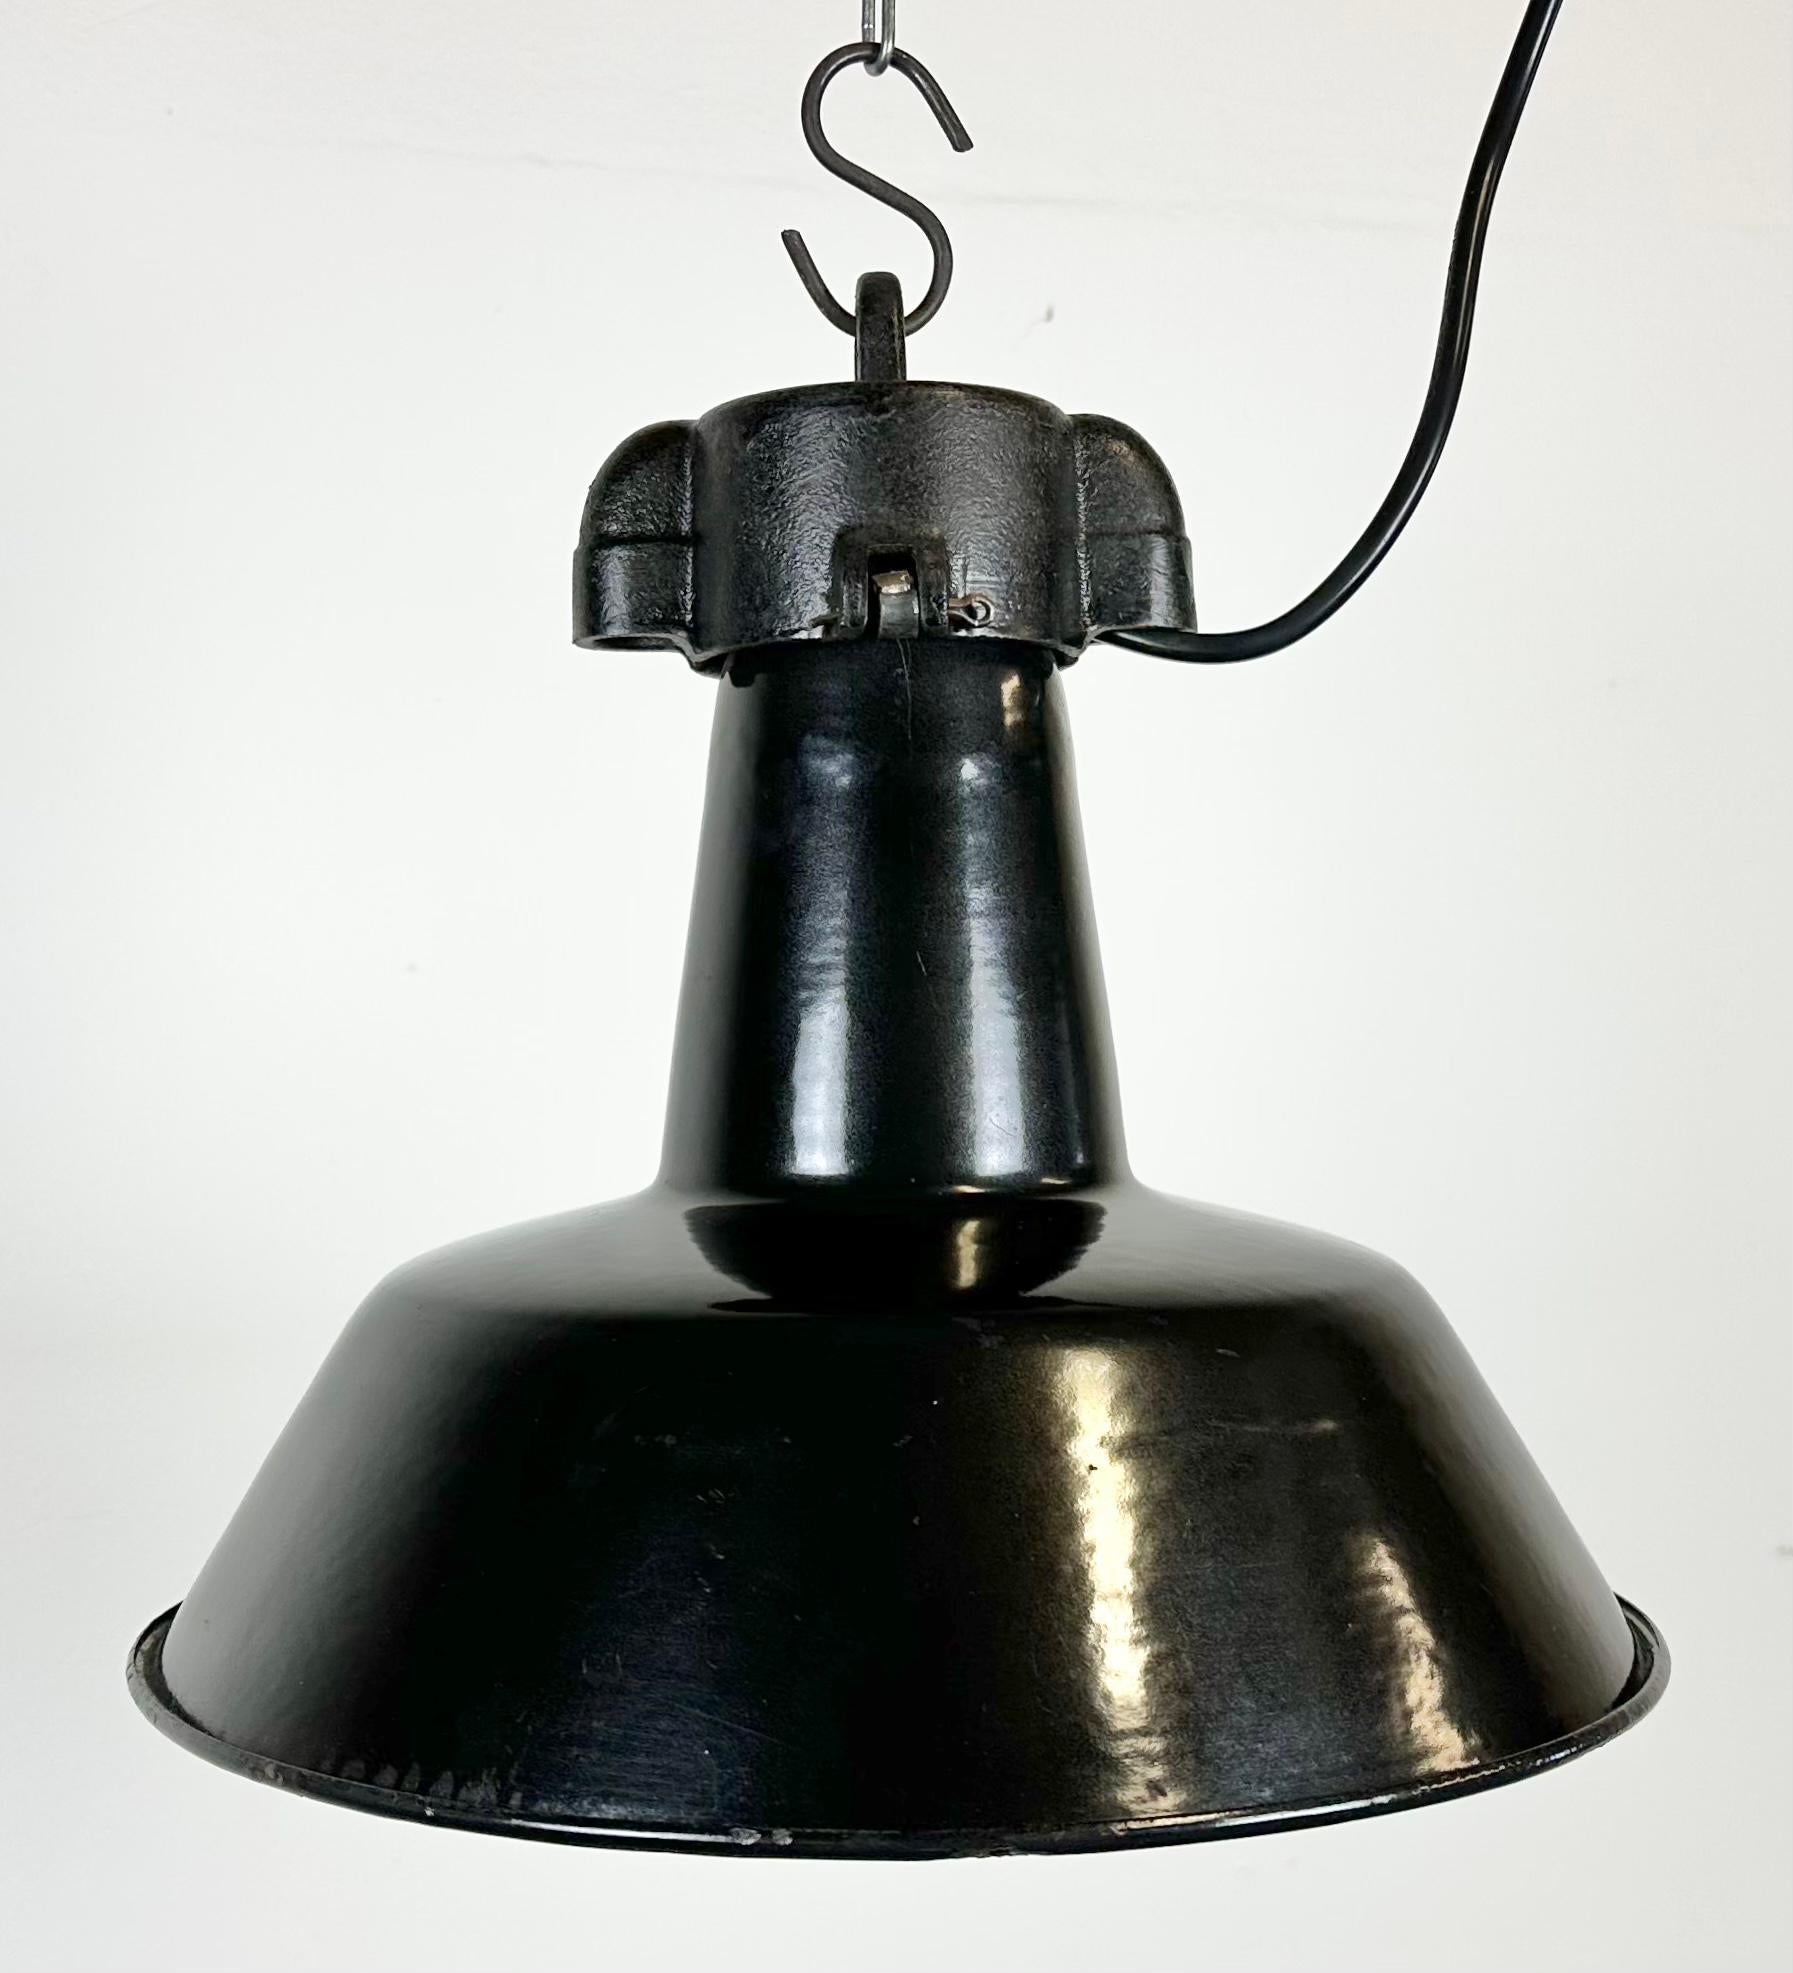 Czech Industrial Black Enamel Factory Lamp with Cast Iron Top, 1960s For Sale